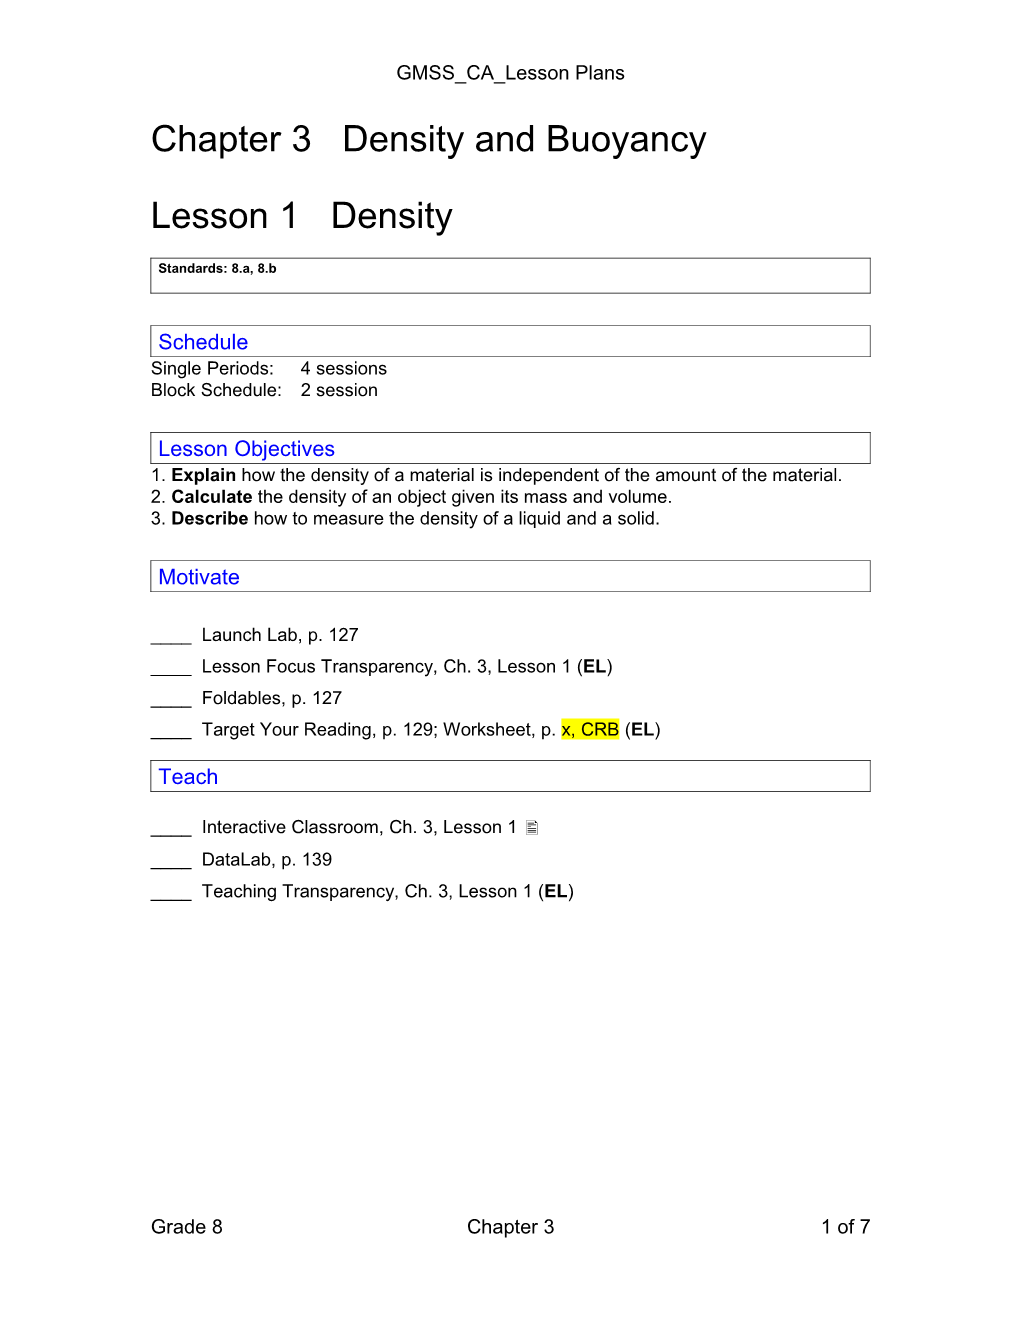 Chapter 3 Density and Buoyancy